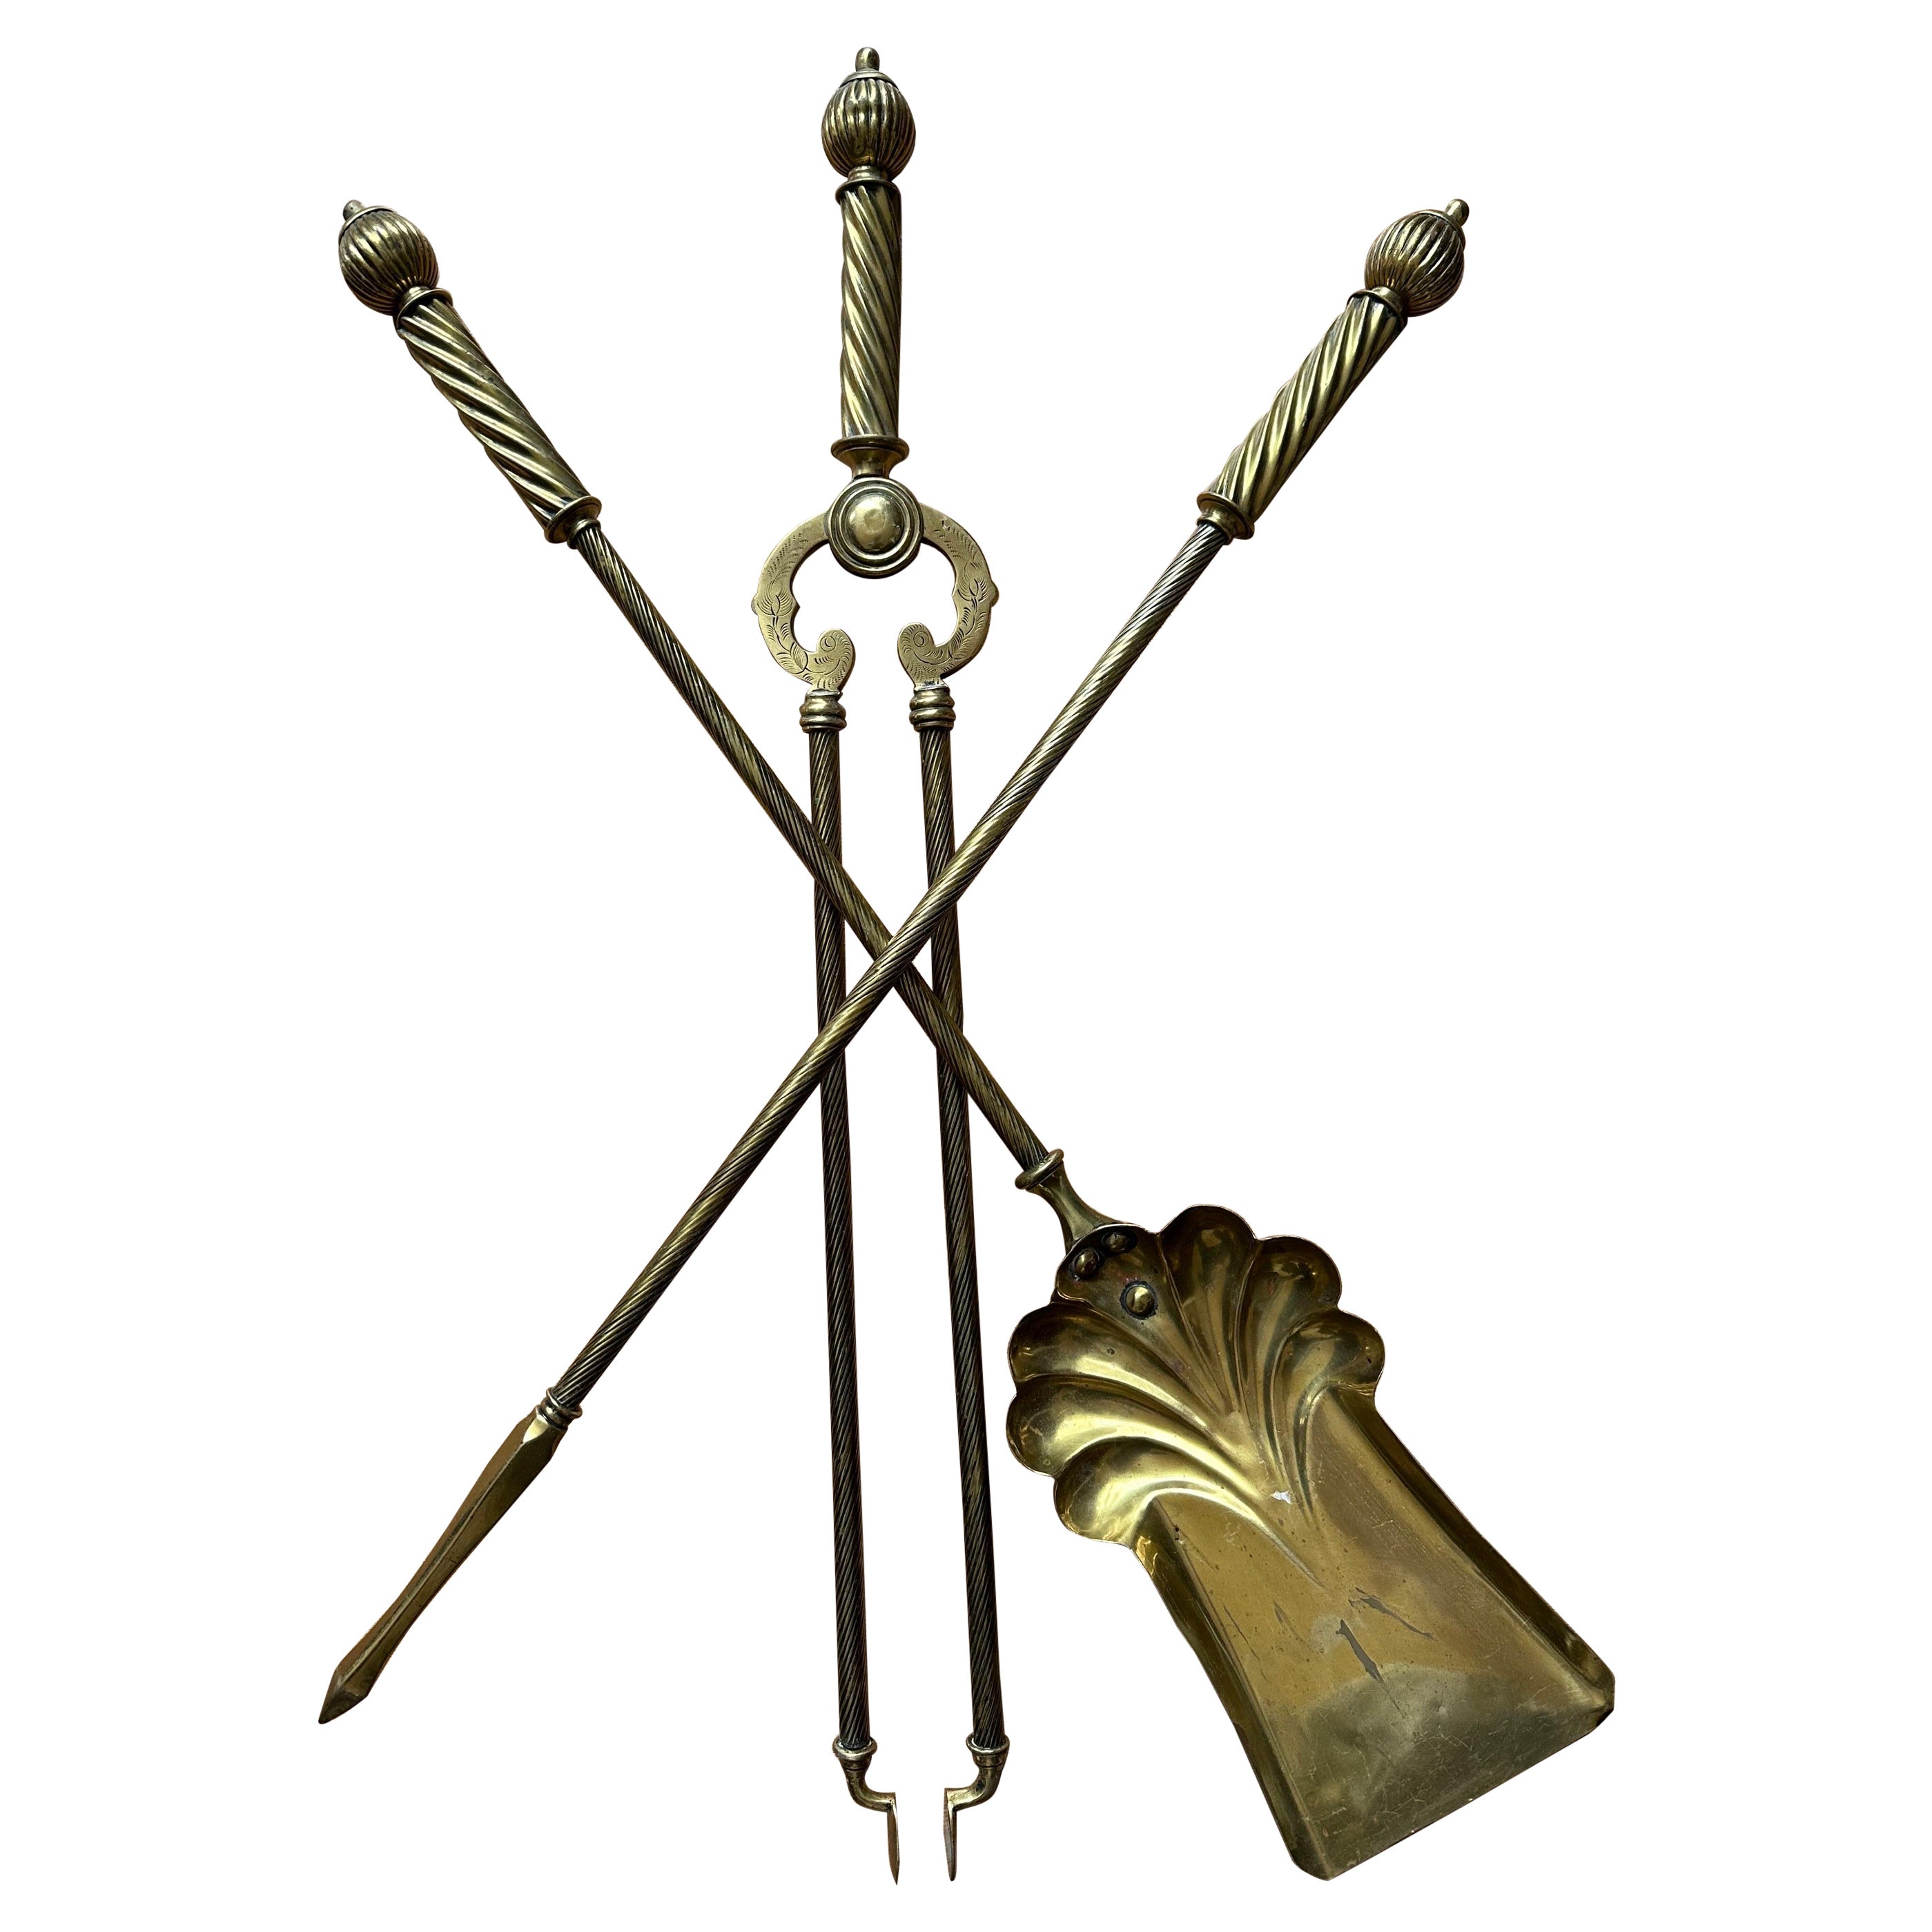 A stunning antique Victorian brass fire companion set. The superb set is solid brass, with beautiful twirl top motif. With matching the elegant yet powerful impression the set provides. This is truly a remarkable set, with fantastic craftsmanship. A